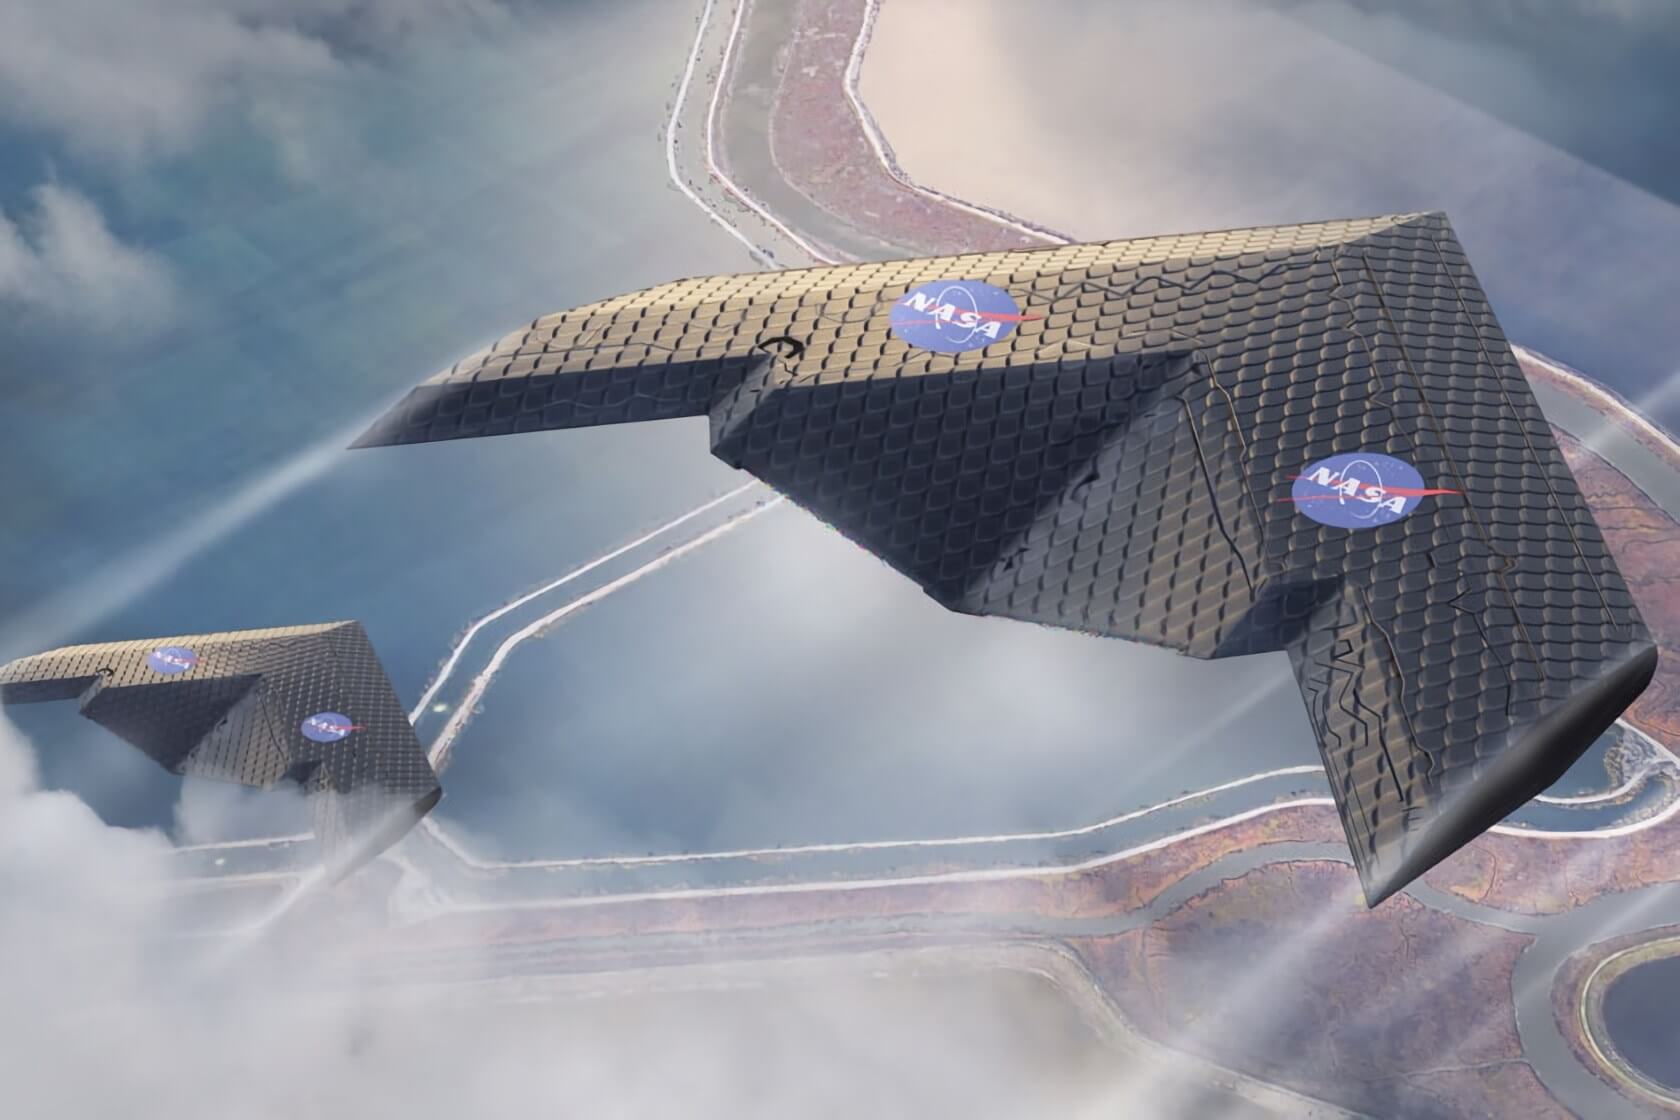 NASA, MIT engineers develop aircraft wing that can change shape mid-flight